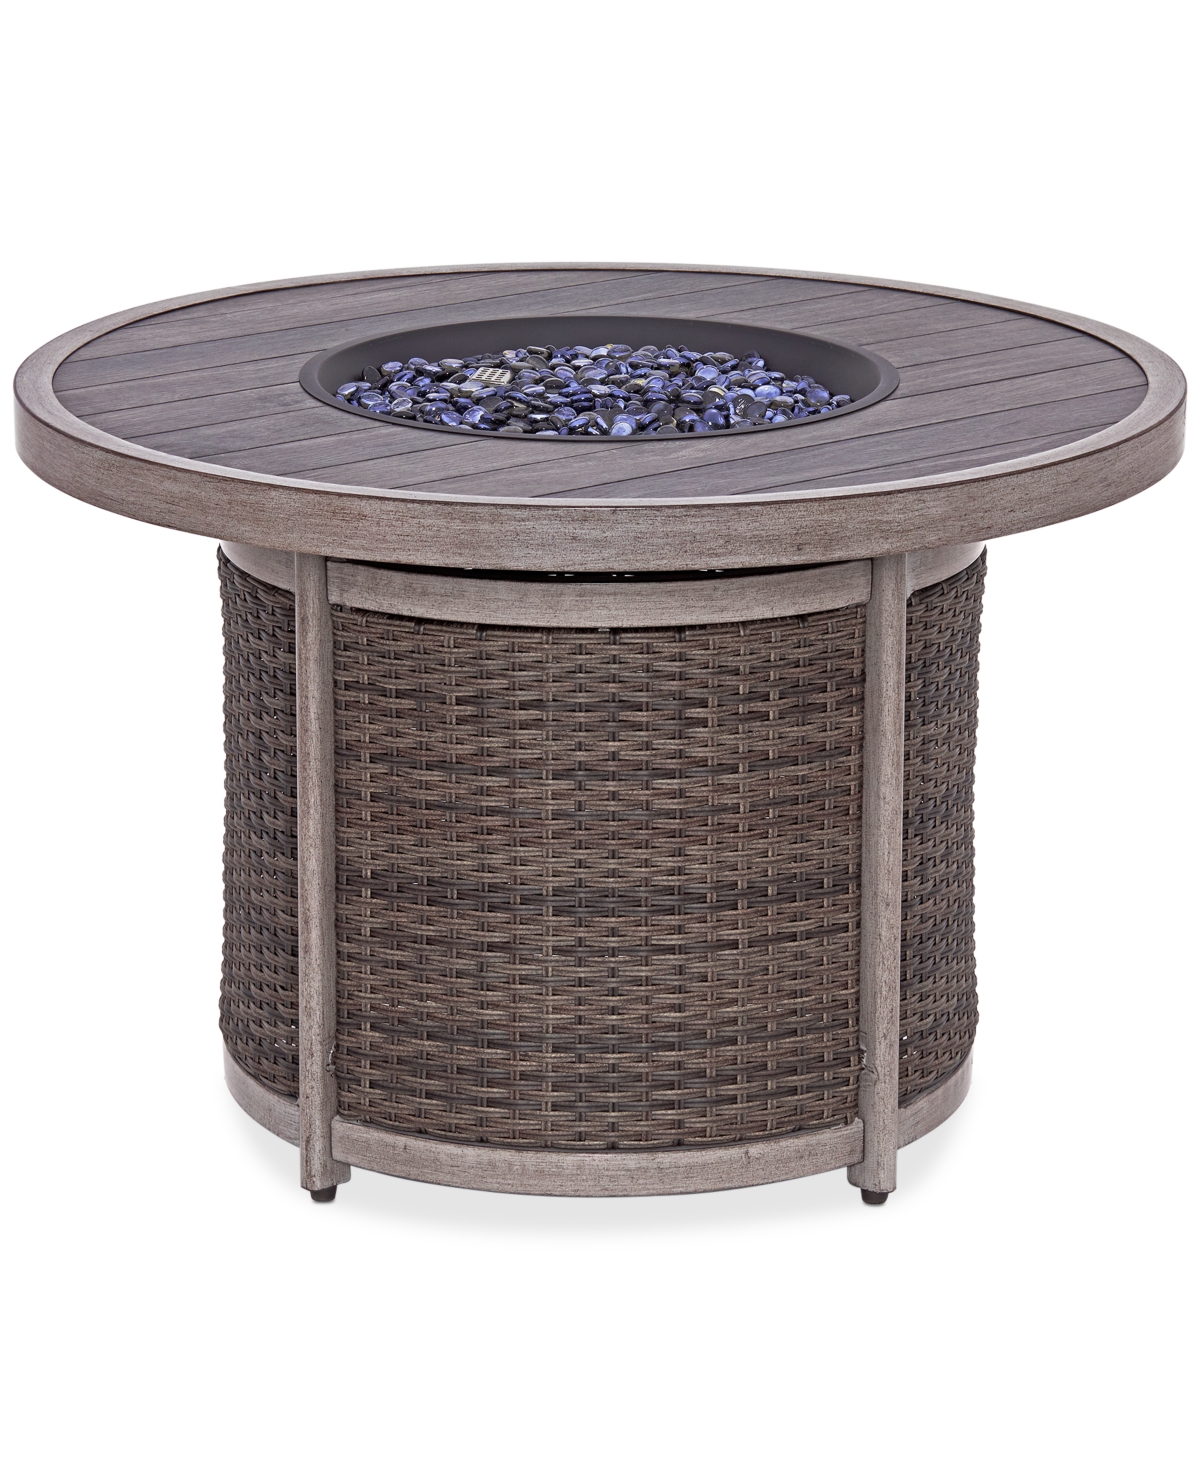 12769669 Charleston Outdoor Round Fire Pit, Created for Mac sku 12769669